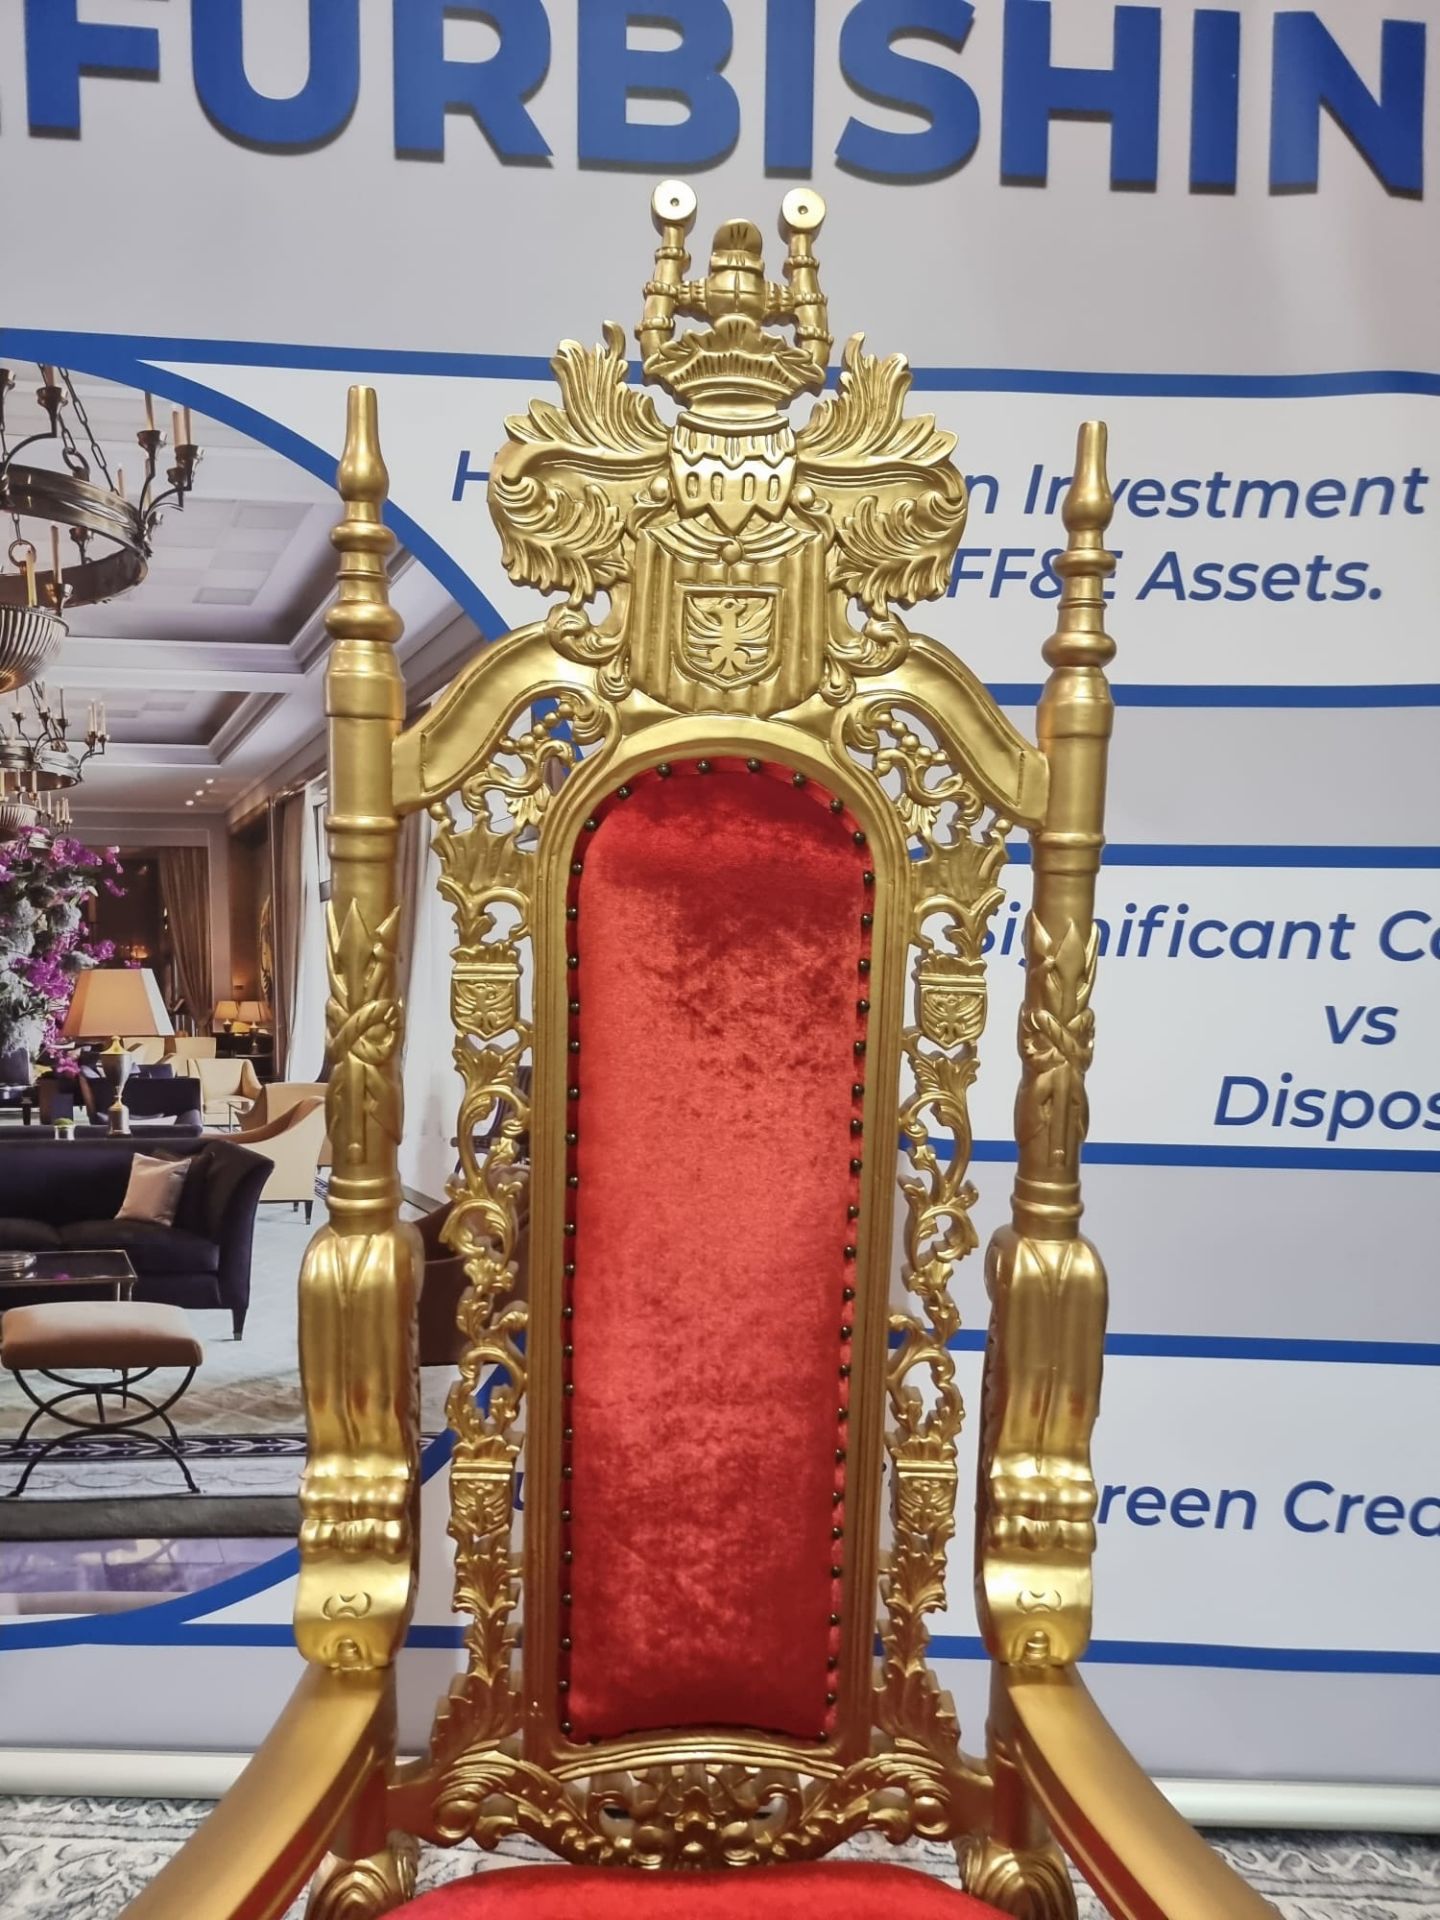 Handmade Mahogany Wood Painted Matt Gold Throne Chair Upholstered In A Pinned Red Velvet Exceptional - Image 15 of 18